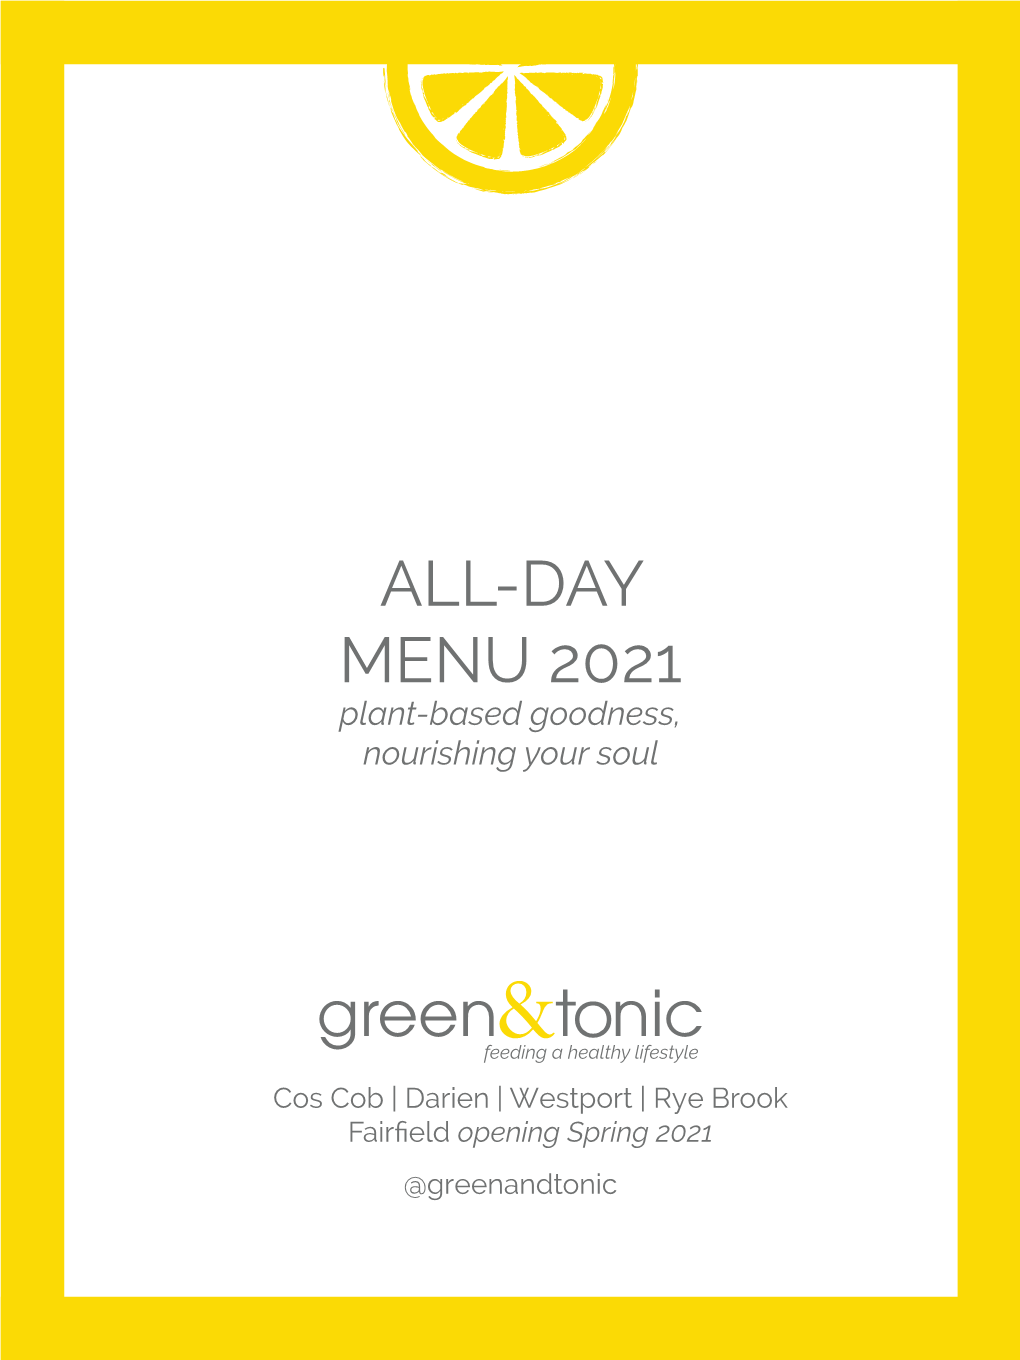 ALL-DAY MENU 2021 Plant-Based Goodness, Nourishing Your Soul